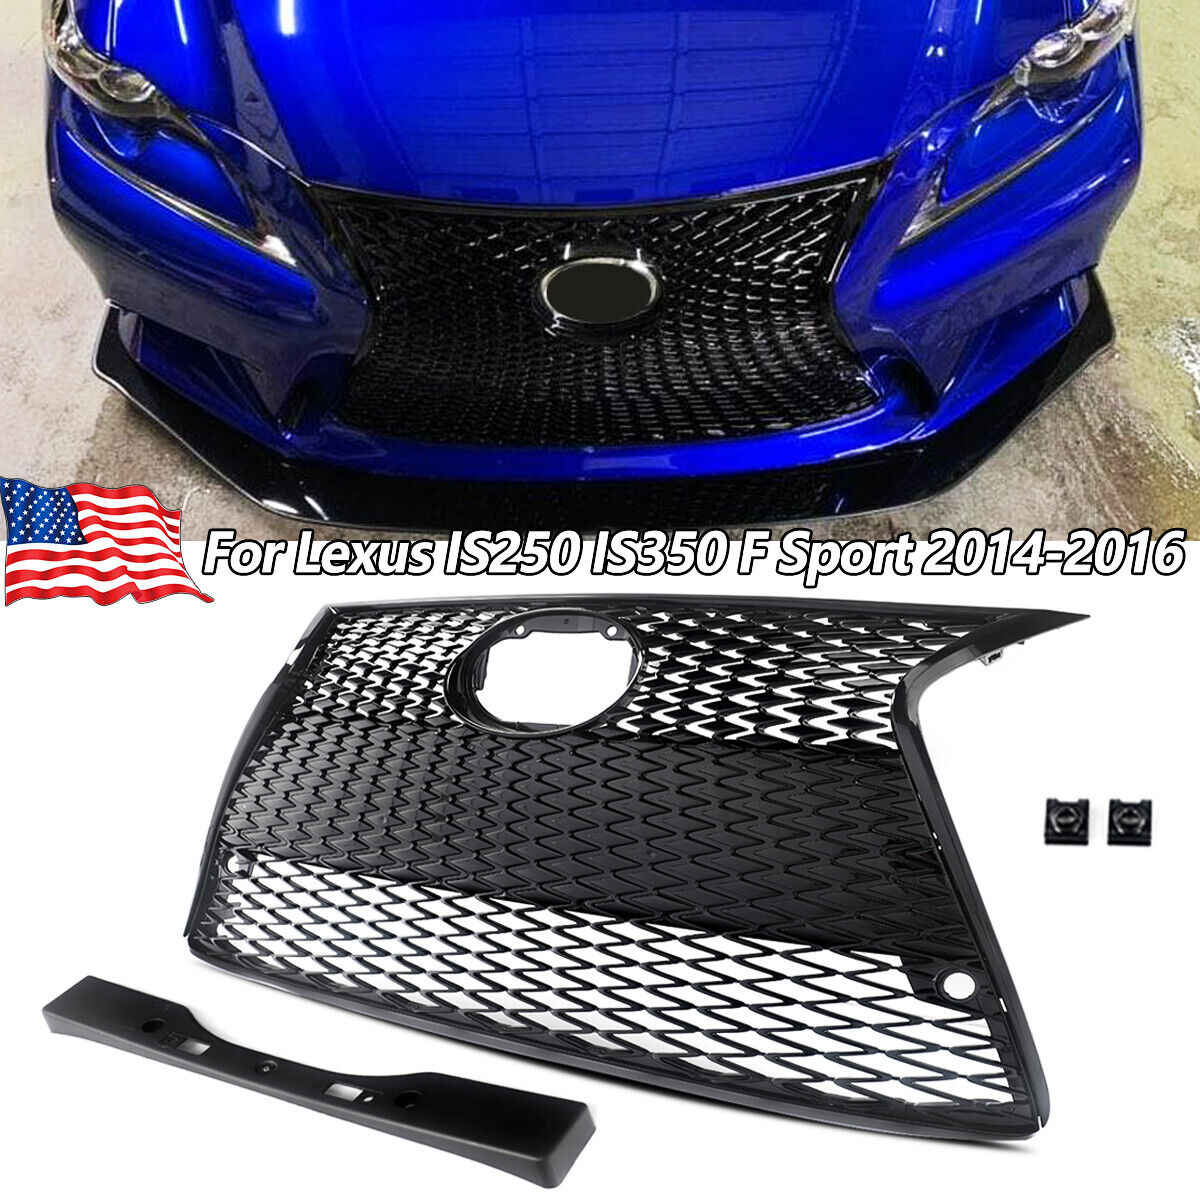 Gloss Black Trim Front Upper+Lower Grille For 2014-16 Lexus IS250 IS350 F Sport